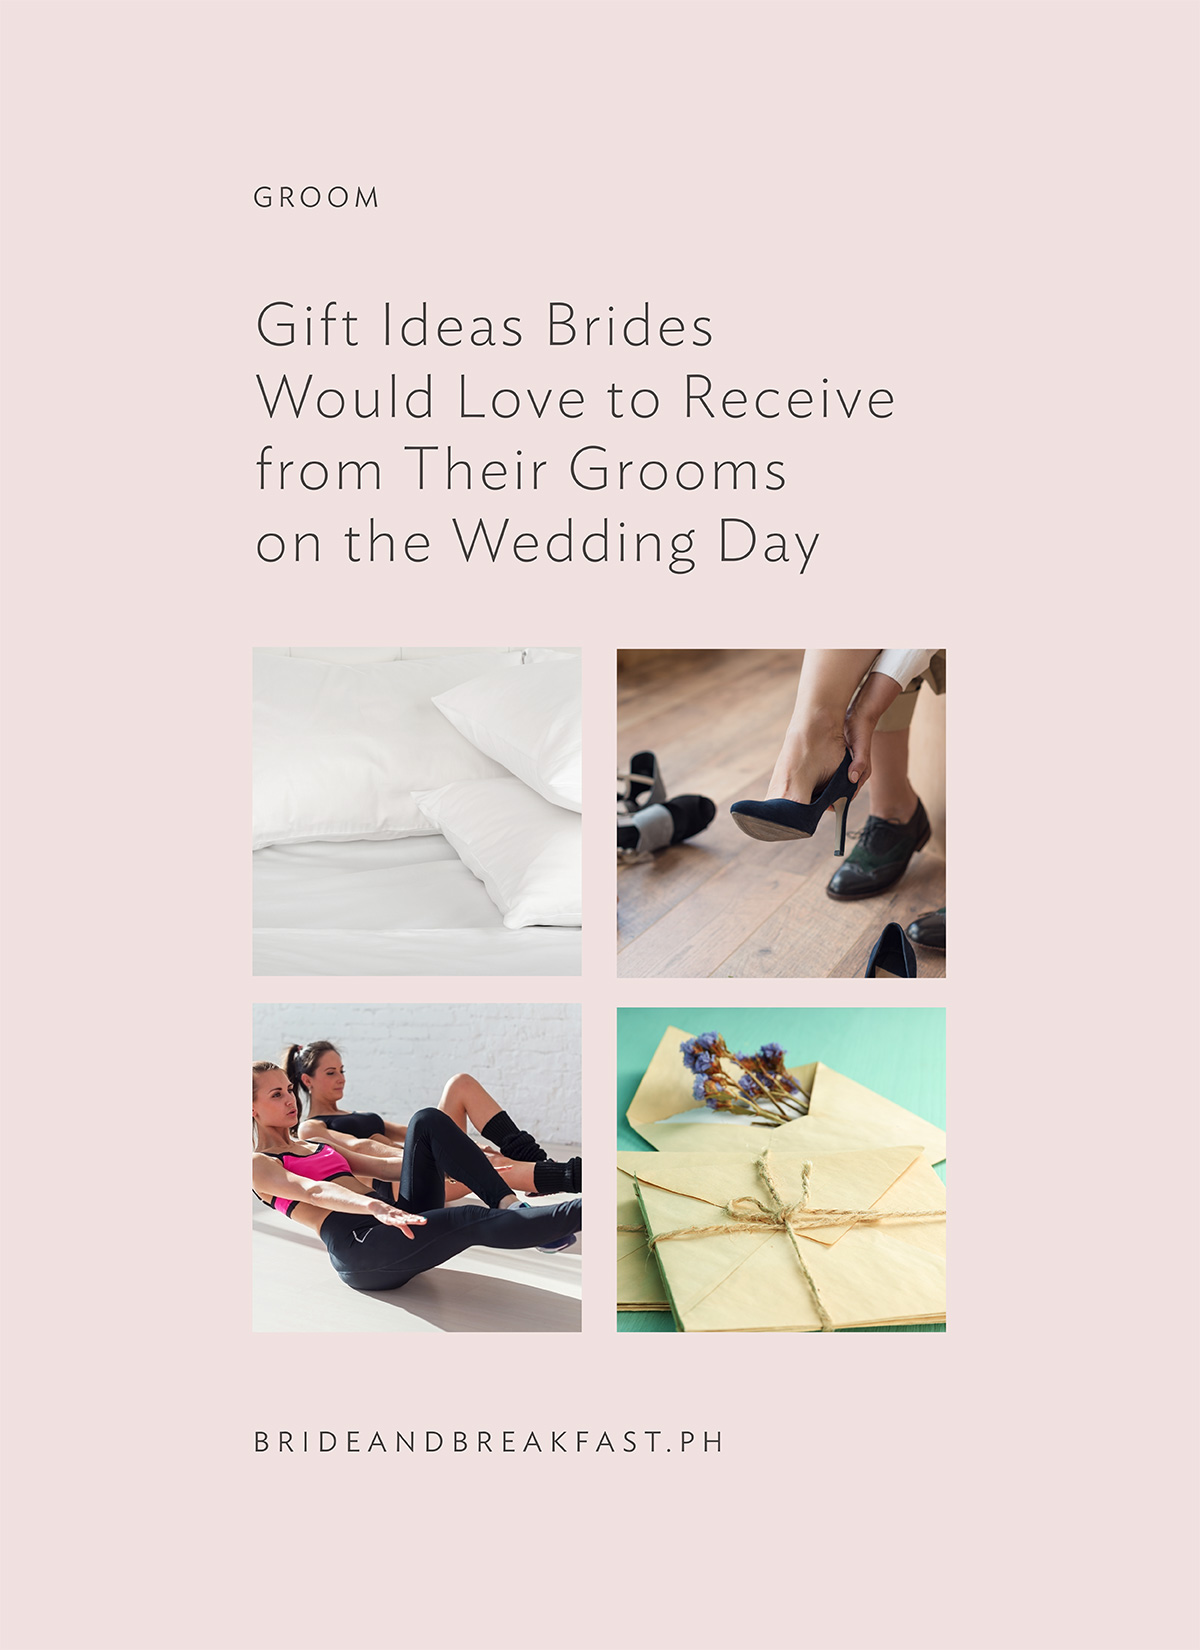 10 Gift Ideas Brides Would Love to Receive from Their Grooms on Their Wedding Day